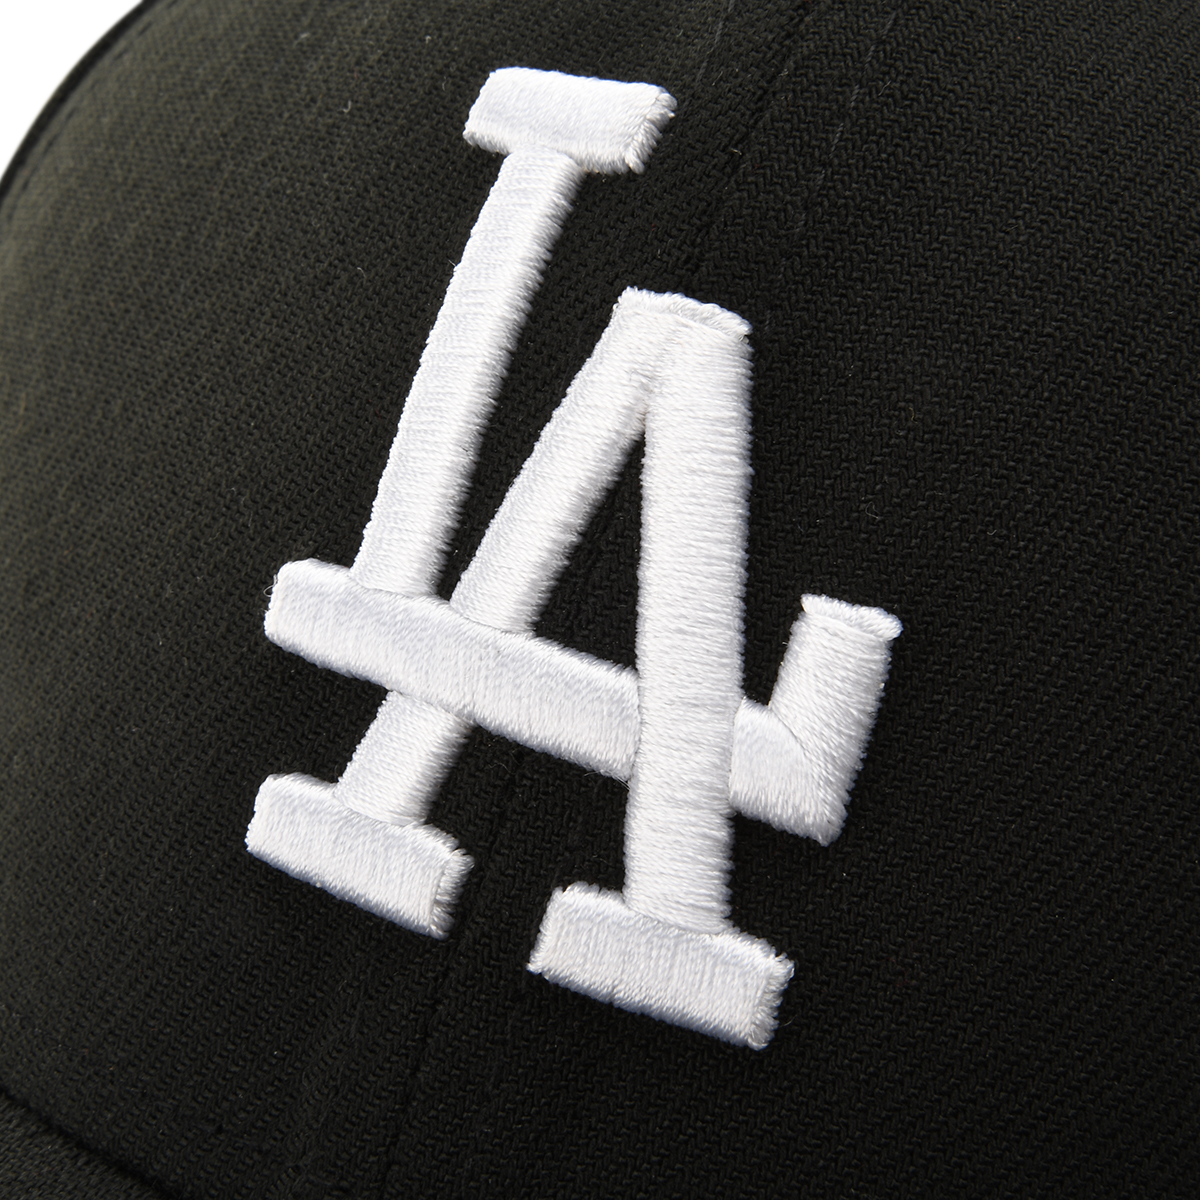 Gorra New Era 950 Ss Los Dodgers,  image number null